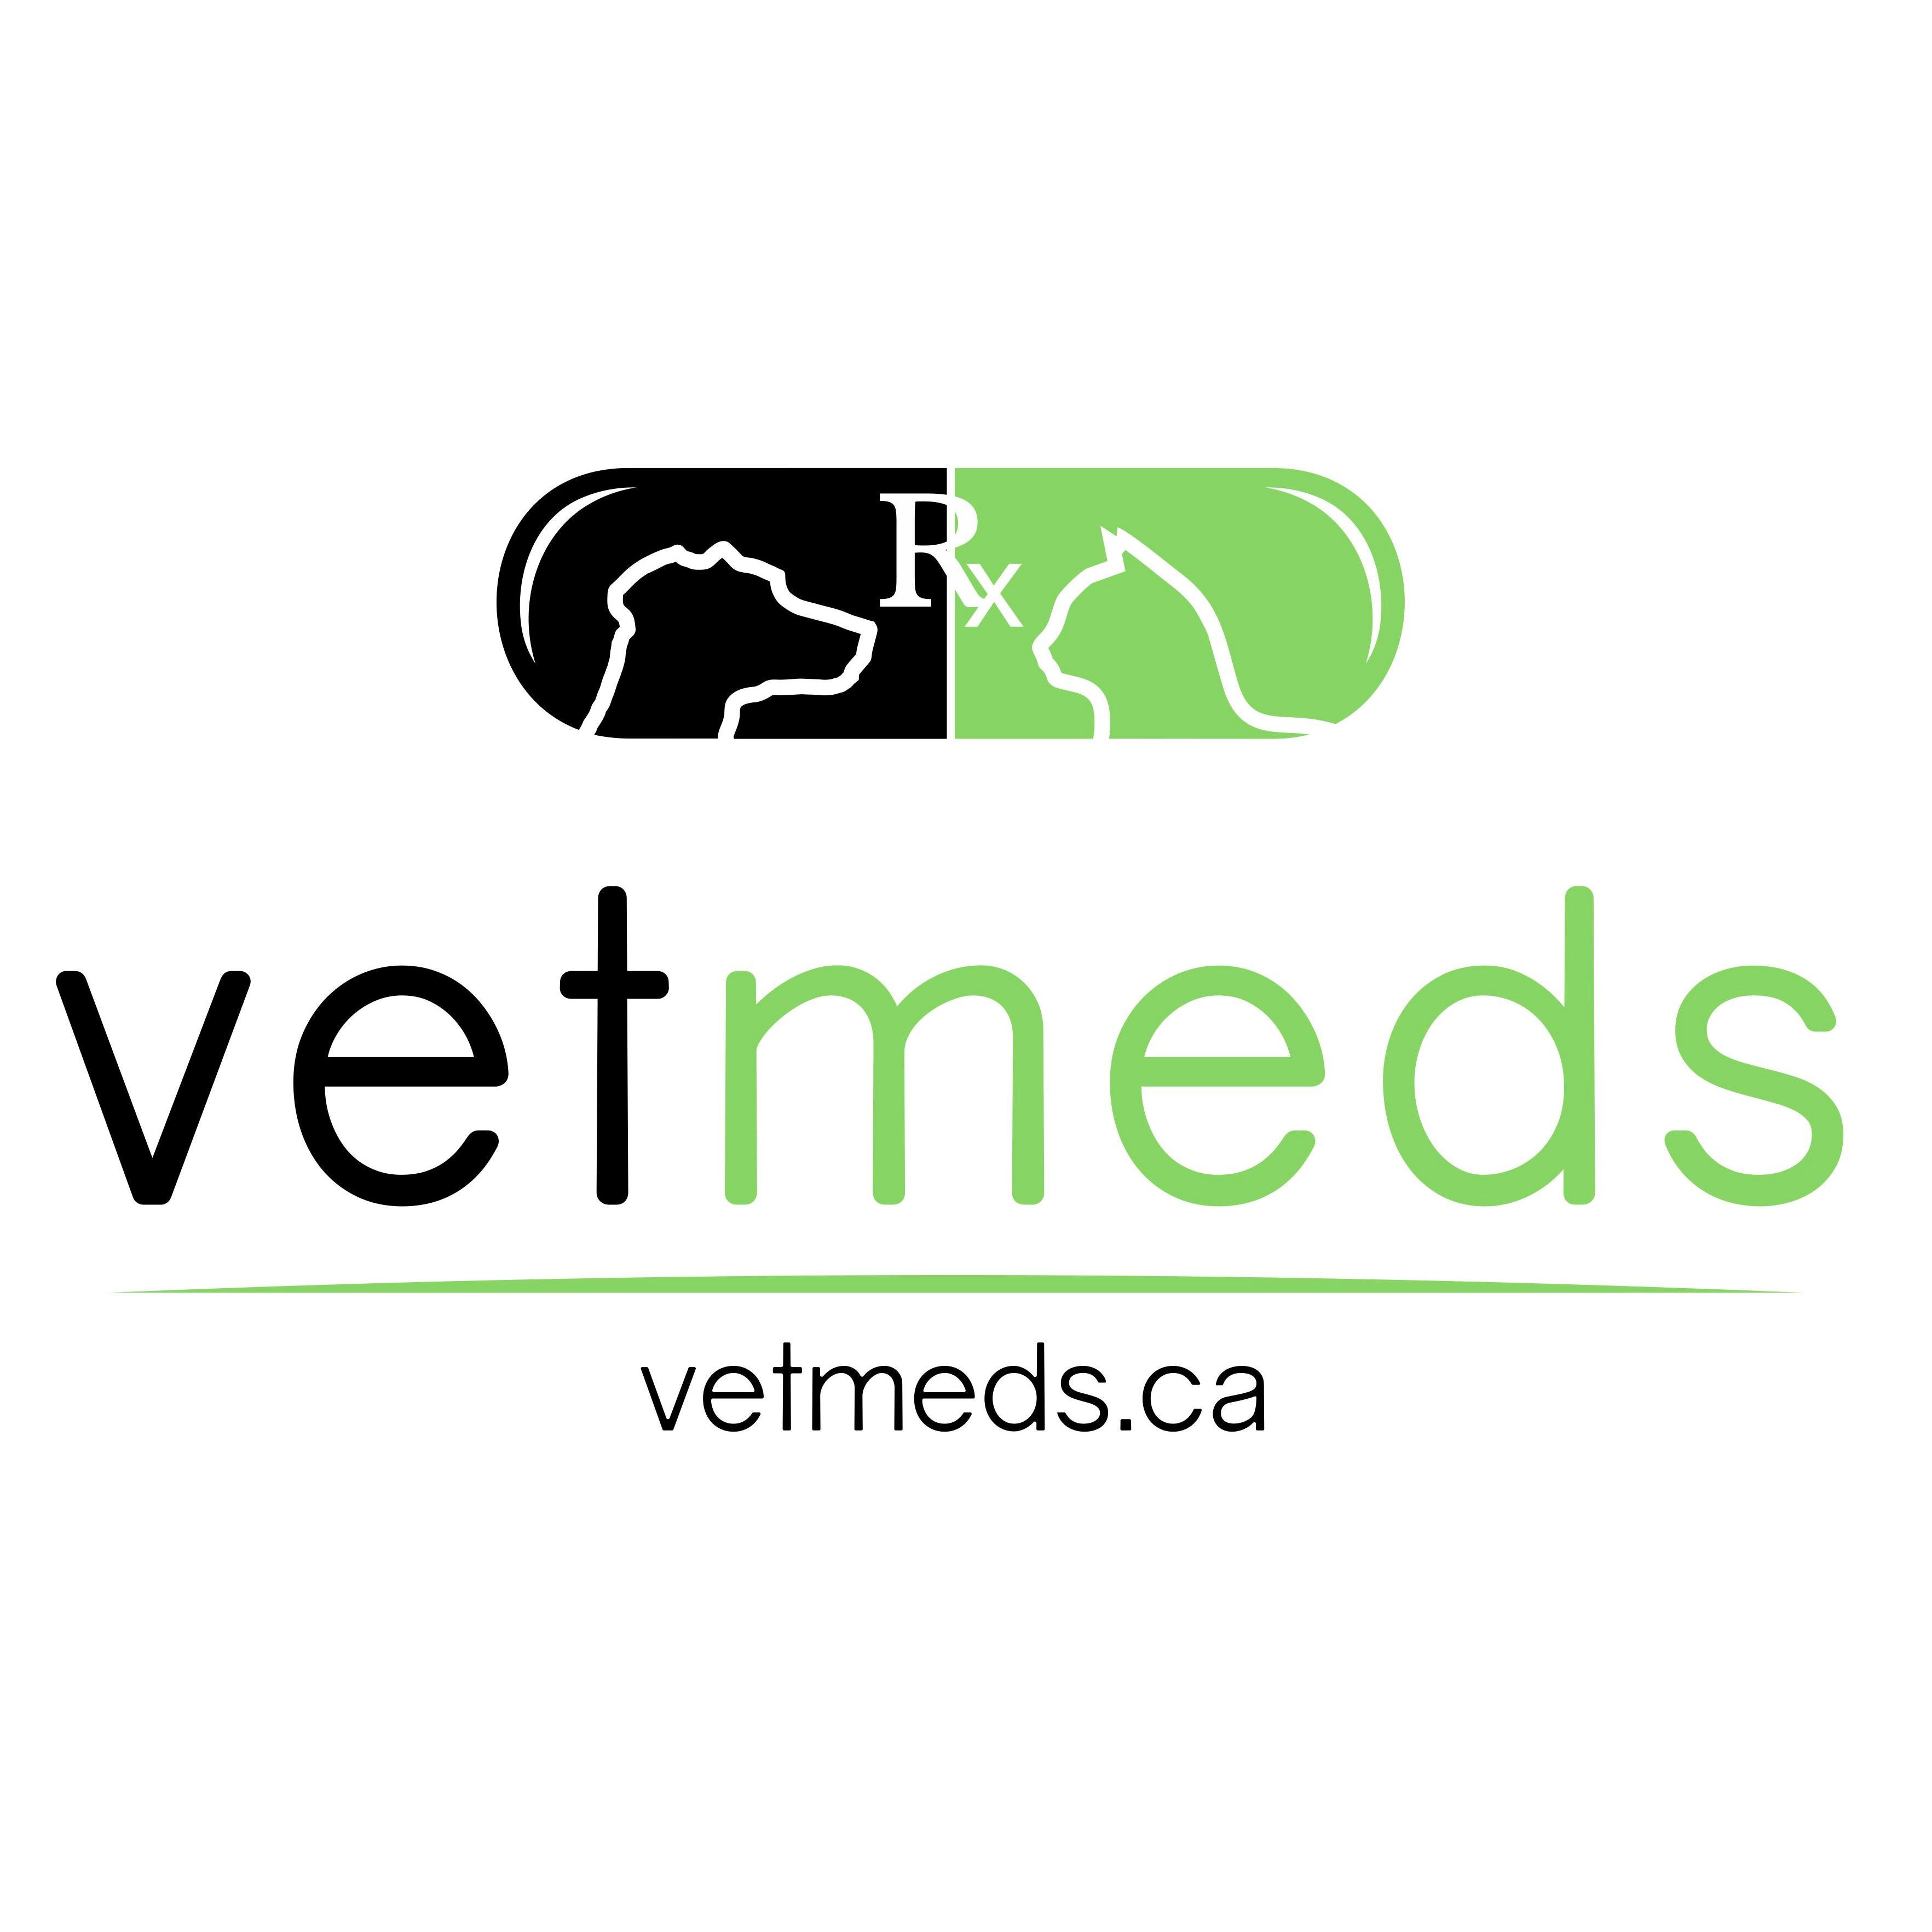 We are a regular Pharmacy in Toronto with Veterinary prescription medications for your pets. Check us out today.